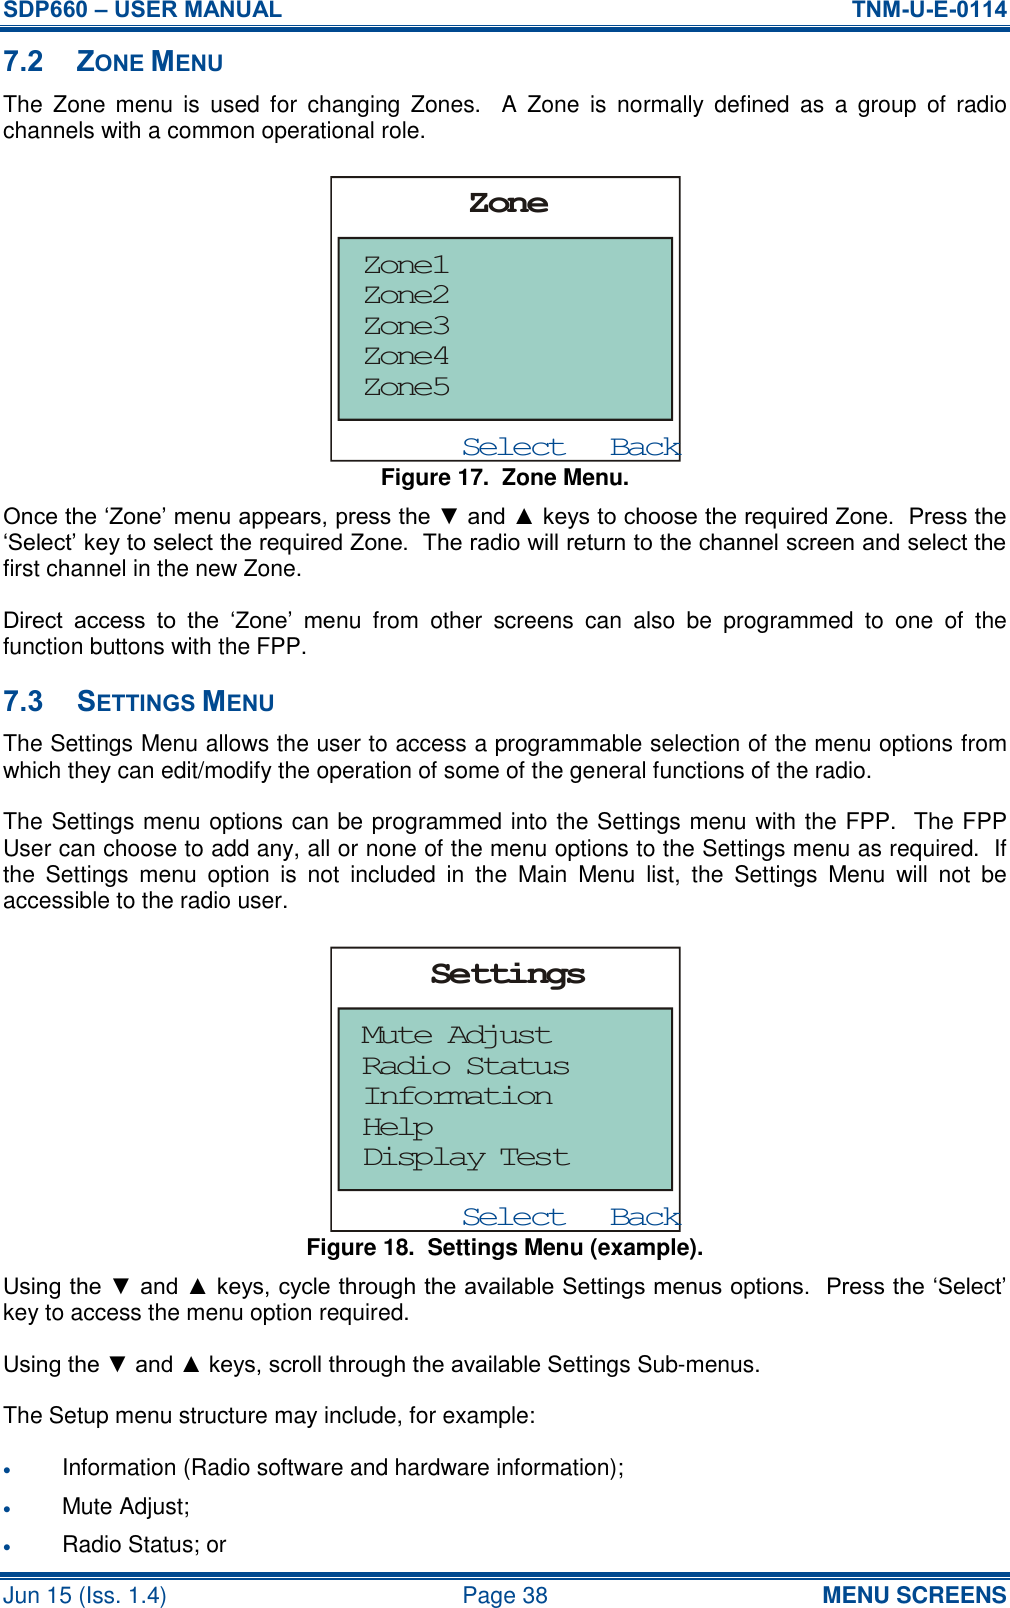 SDP660 – USER MANUAL  TNM-U-E-0114 Jun 15 (Iss. 1.4)  Page 38 MENU SCREENS 7.2 ZONE MENU The  Zone  menu  is  used for  changing  Zones.    A  Zone  is  normally  defined  as  a  group  of  radio channels with a common operational role. Figure 17.  Zone Menu. Once the ‘Zone’ menu appears, press the ▼ and ▲ keys to choose the required Zone.  Press the ‘Select’ key to select the required Zone.  The radio will return to the channel screen and select the first channel in the new Zone. Direct  access  to  the  ‘Zone’  menu  from  other  screens  can  also  be  programmed  to  one  of  the function buttons with the FPP. 7.3 SETTINGS MENU The Settings Menu allows the user to access a programmable selection of the menu options from which they can edit/modify the operation of some of the general functions of the radio. The Settings menu options can be programmed into the Settings menu with the FPP.  The FPP User can choose to add any, all or none of the menu options to the Settings menu as required.  If the  Settings  menu  option  is  not  included  in  the  Main  Menu  list,  the  Settings  Menu  will  not  be accessible to the radio user. Figure 18.  Settings Menu (example). Using the ▼ and ▲ keys, cycle through the available Settings menus options.  Press the ‘Select’ key to access the menu option required. Using the ▼ and ▲ keys, scroll through the available Settings Sub-menus. The Setup menu structure may include, for example:  Information (Radio software and hardware information);  Mute Adjust;  Radio Status; or BackSelectZoneZone1Zone5Zone4Zone3Zone2BackSelectSettingsMute AdjustDisplay TestHelpInformationRadio Status